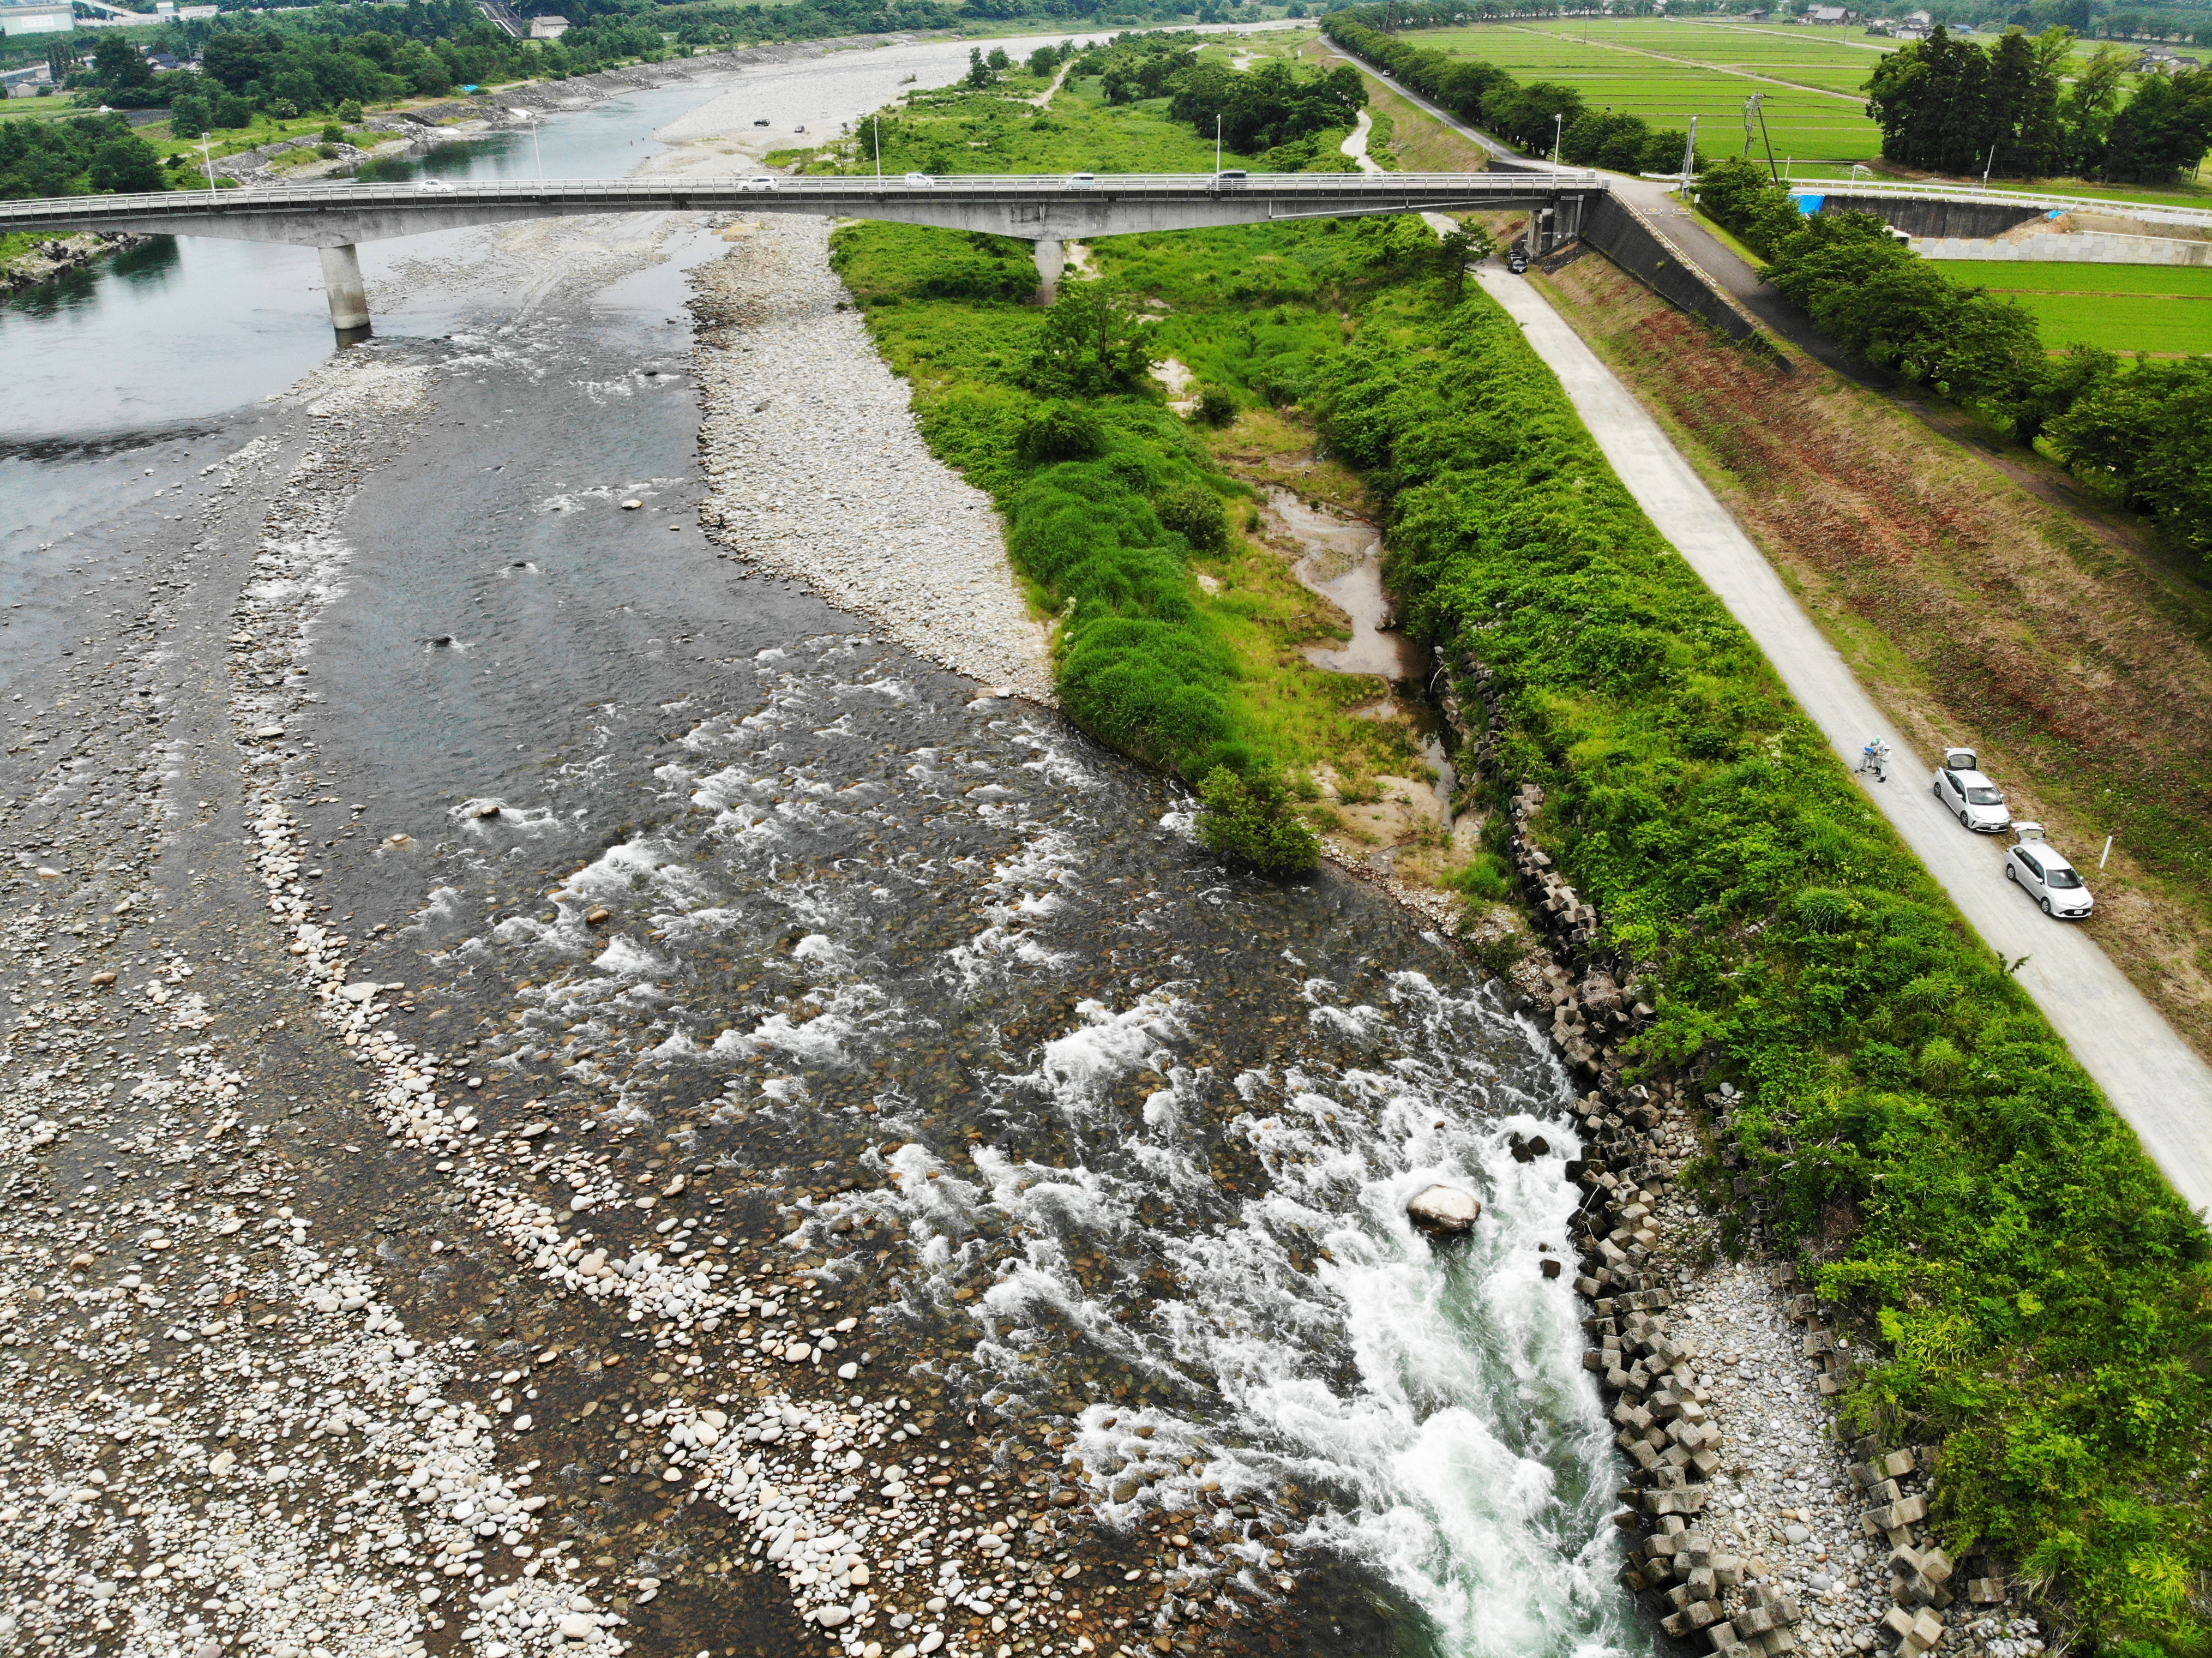 Image taken by a drone to inspect the banks on Jinzu River (in Toyama Prefecture)